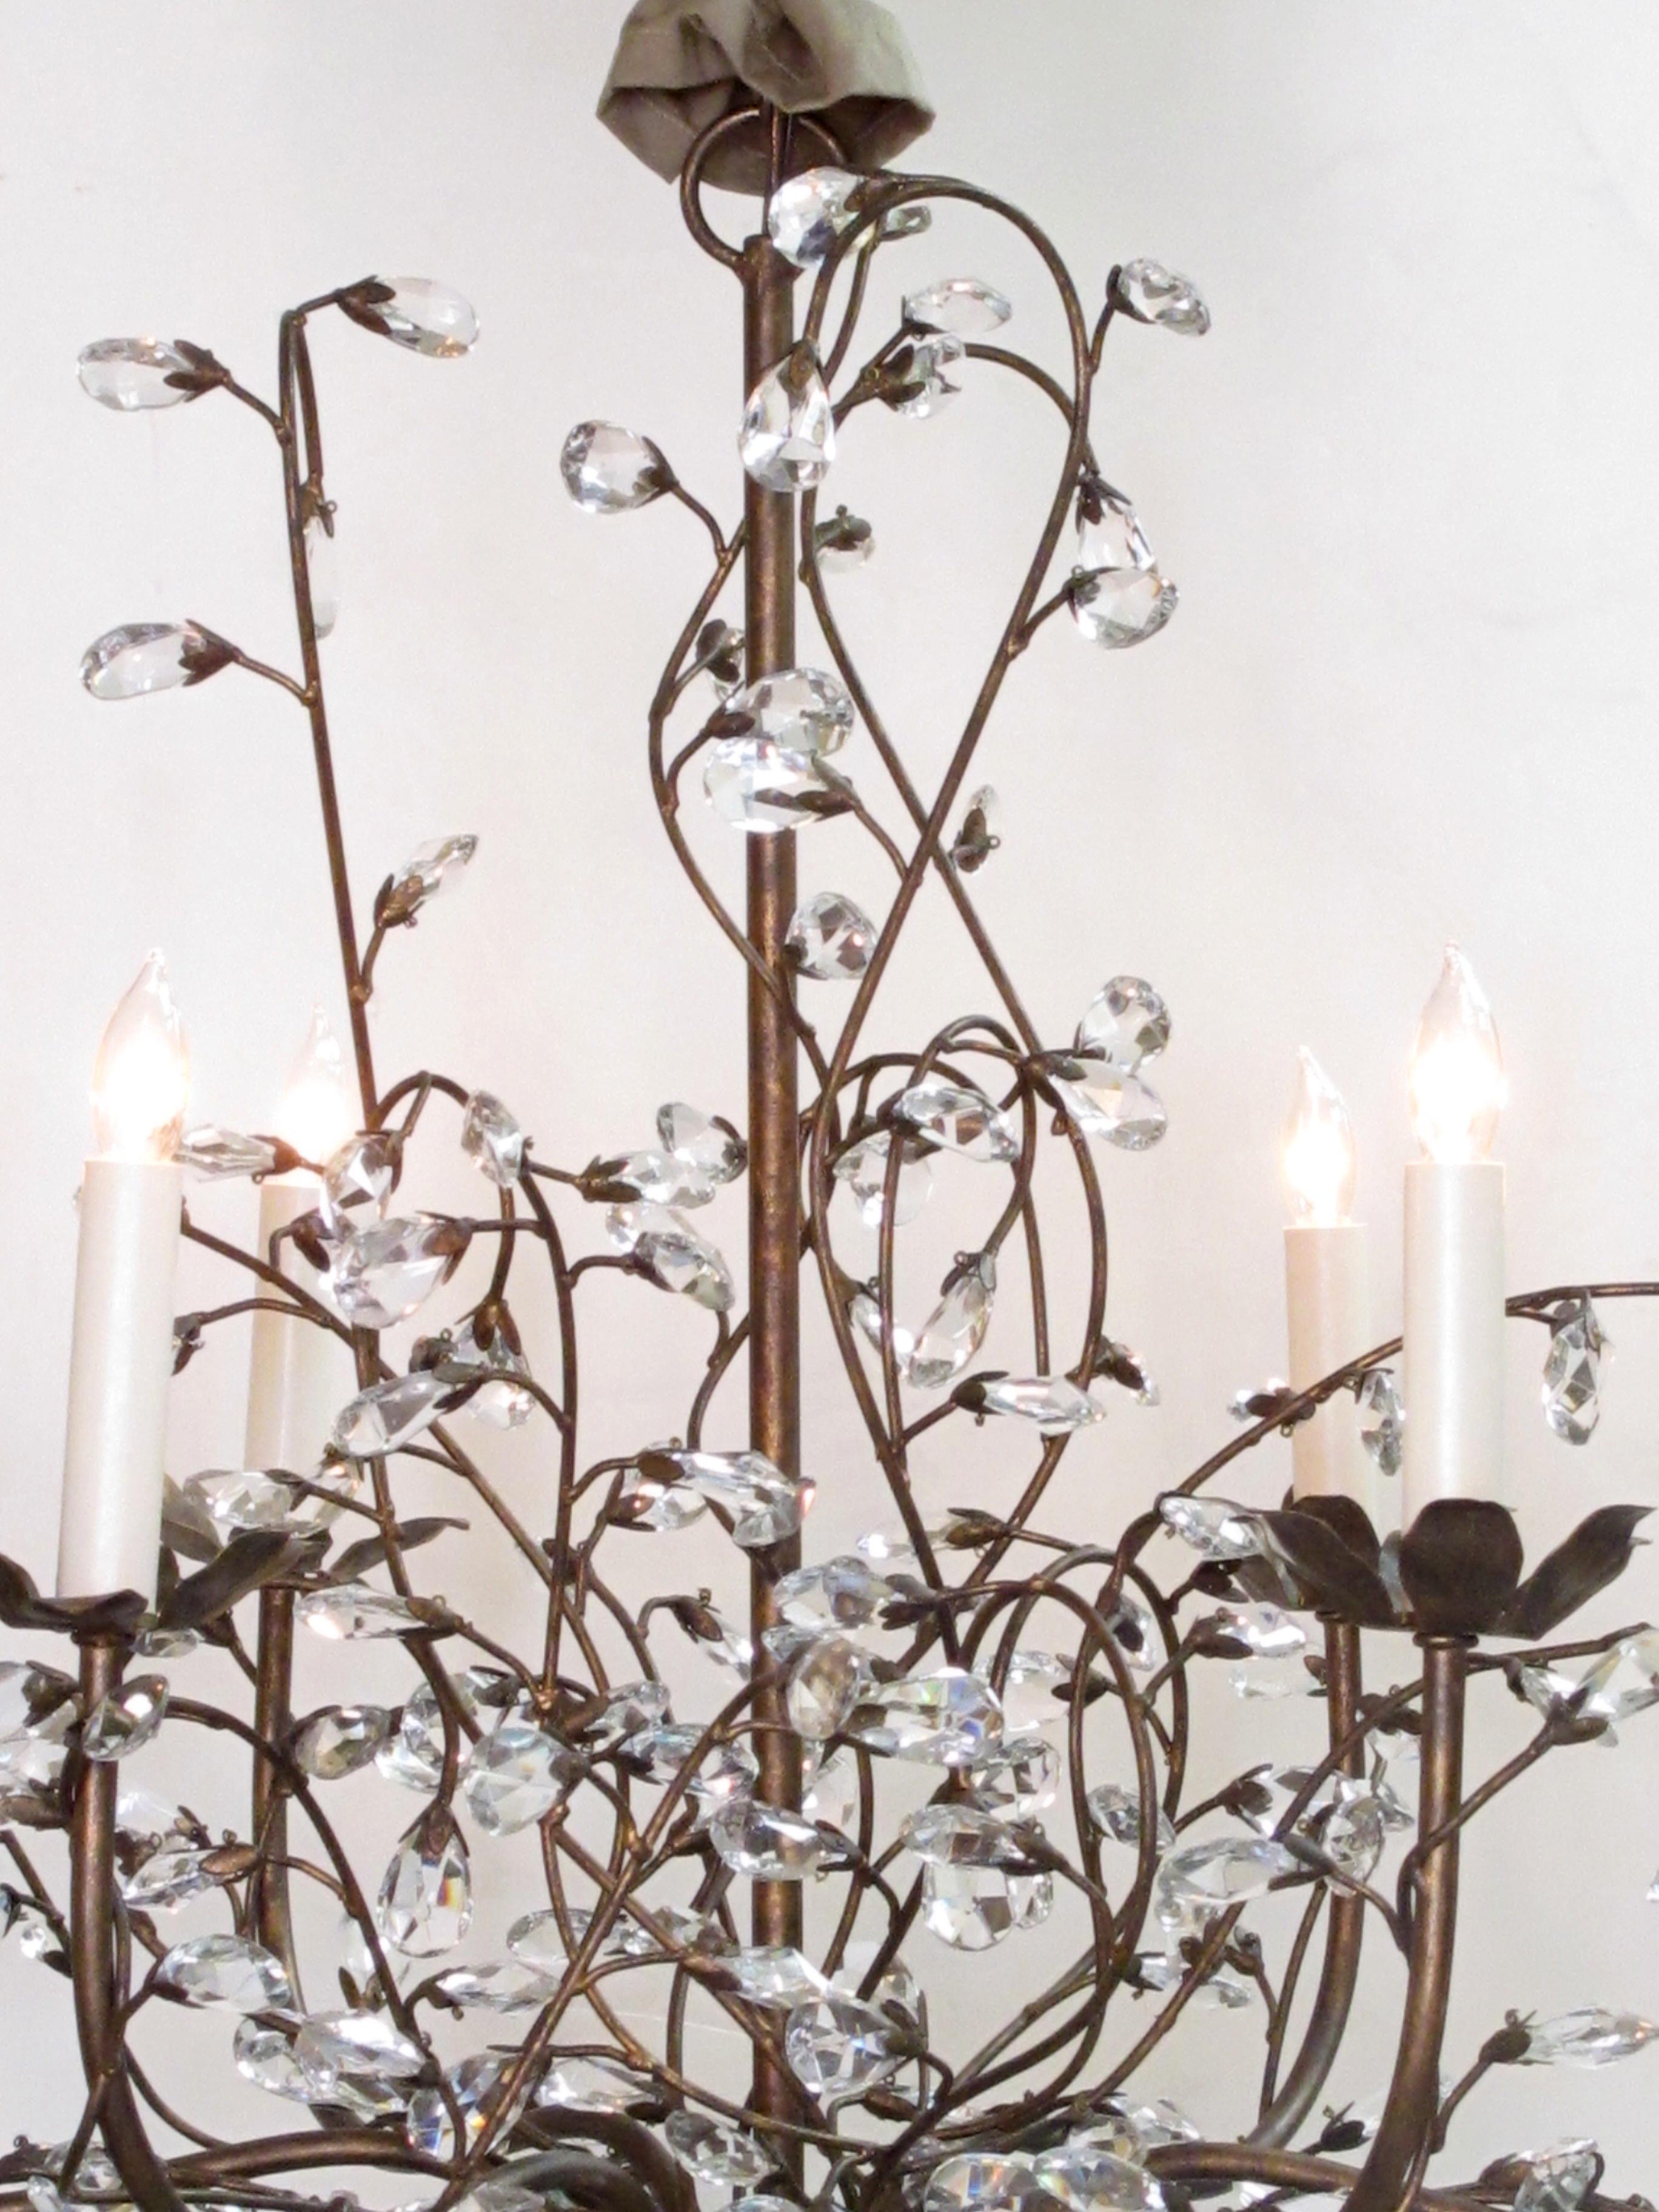 A playful Italian 1970s bronze lacquered metal six-arm chandelier adorned with crystal foliate tendrils; the central shaft emanating six bronze lacquered metal candle arms interspersed with meandering vines ending with crystal petals, excellent